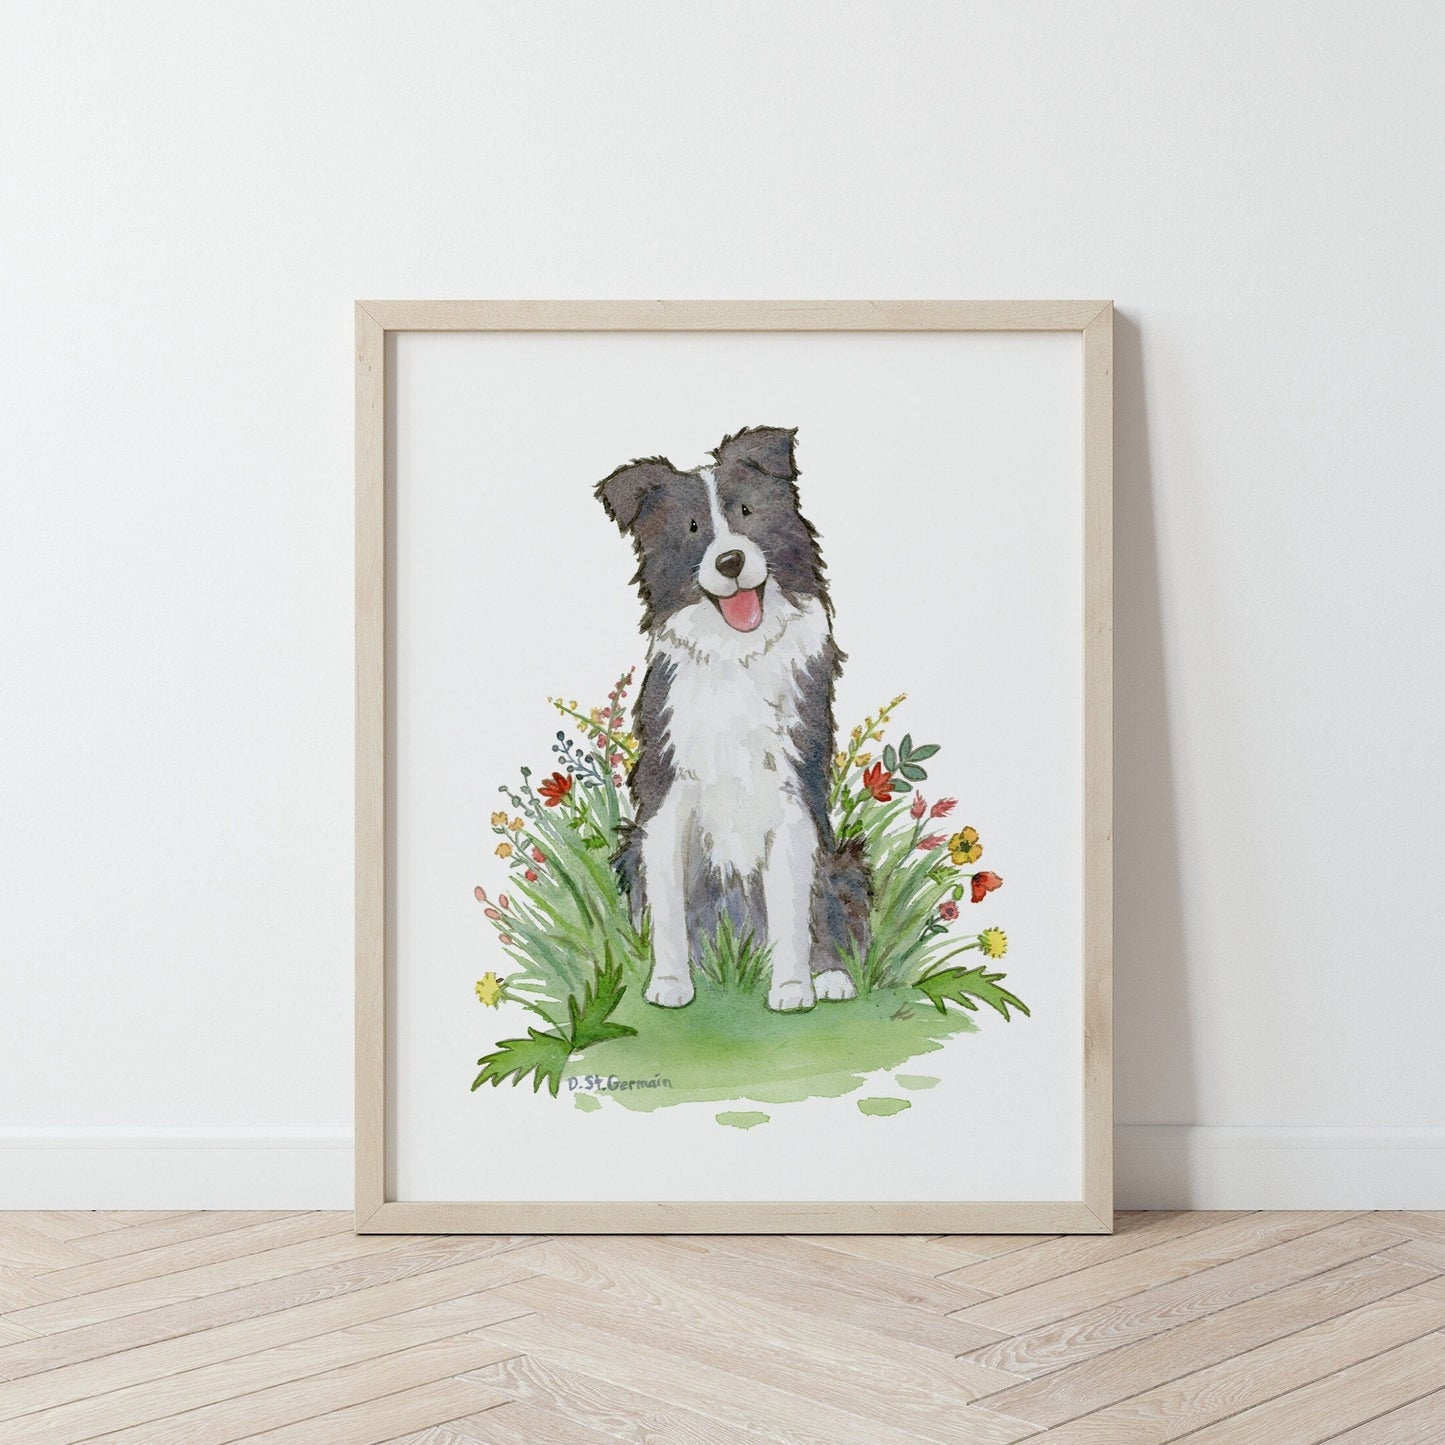 Framed print of a happy black and white border collie dog sitting in a patch of red and yellow wildflowers.